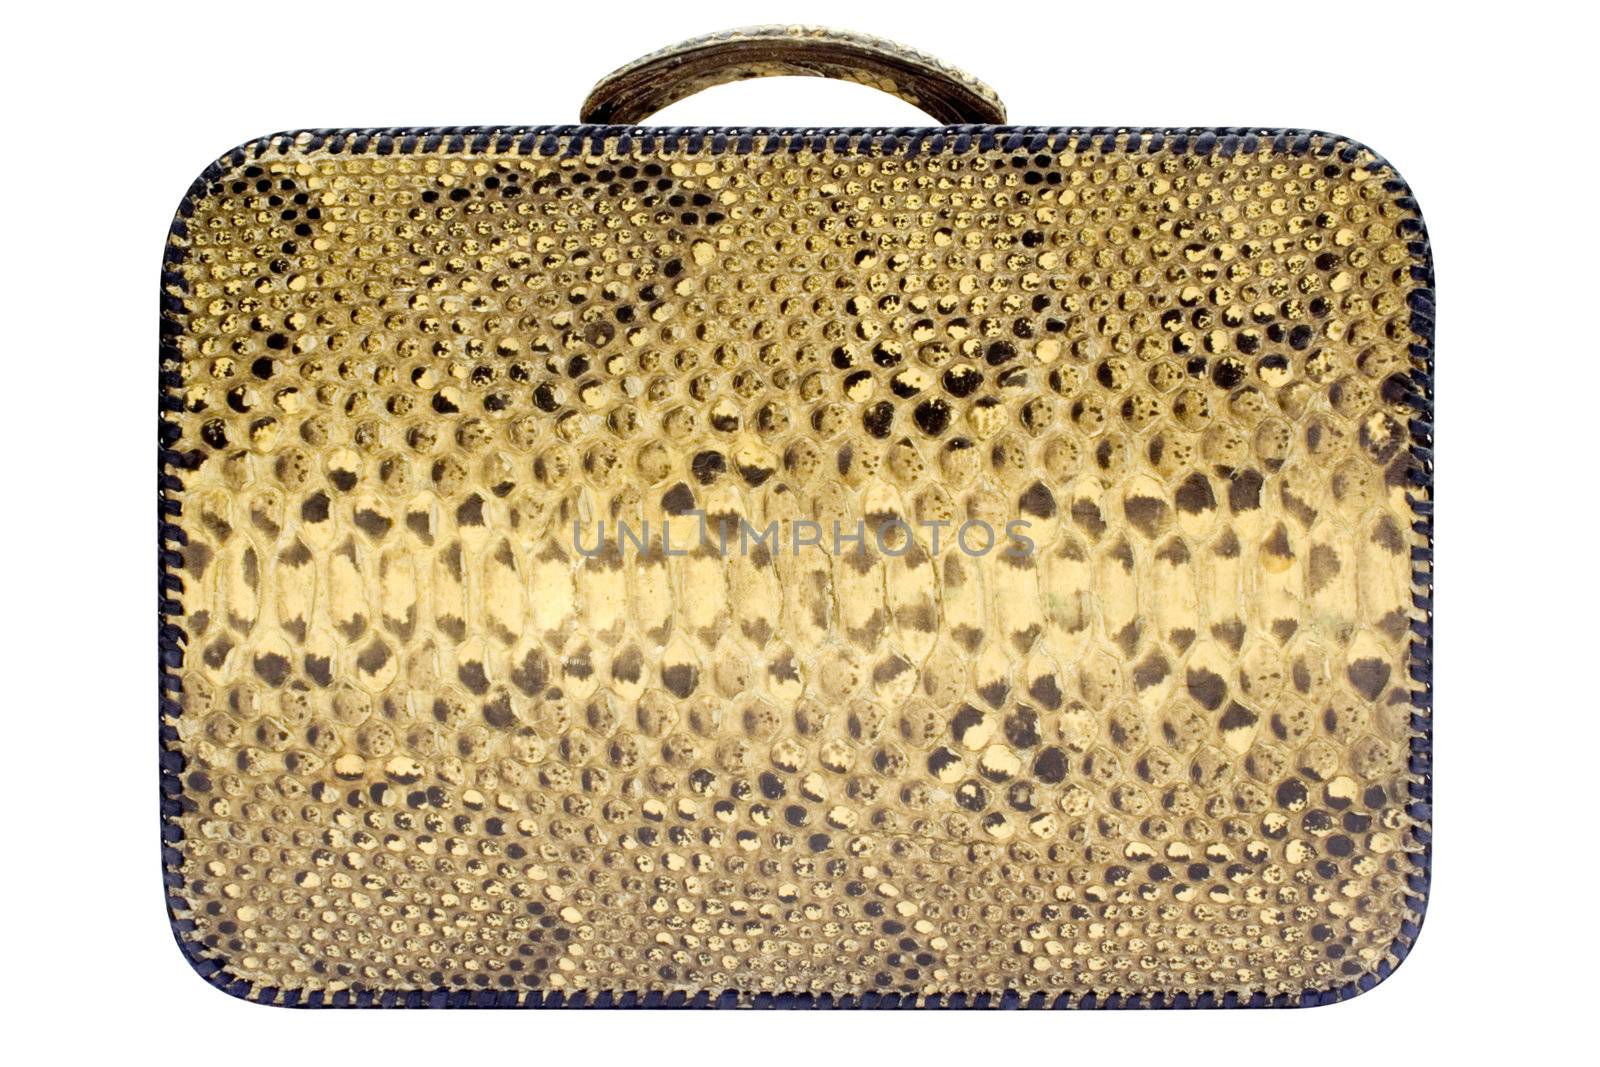 Exotic baggage isolated on white. File contains clipping path.